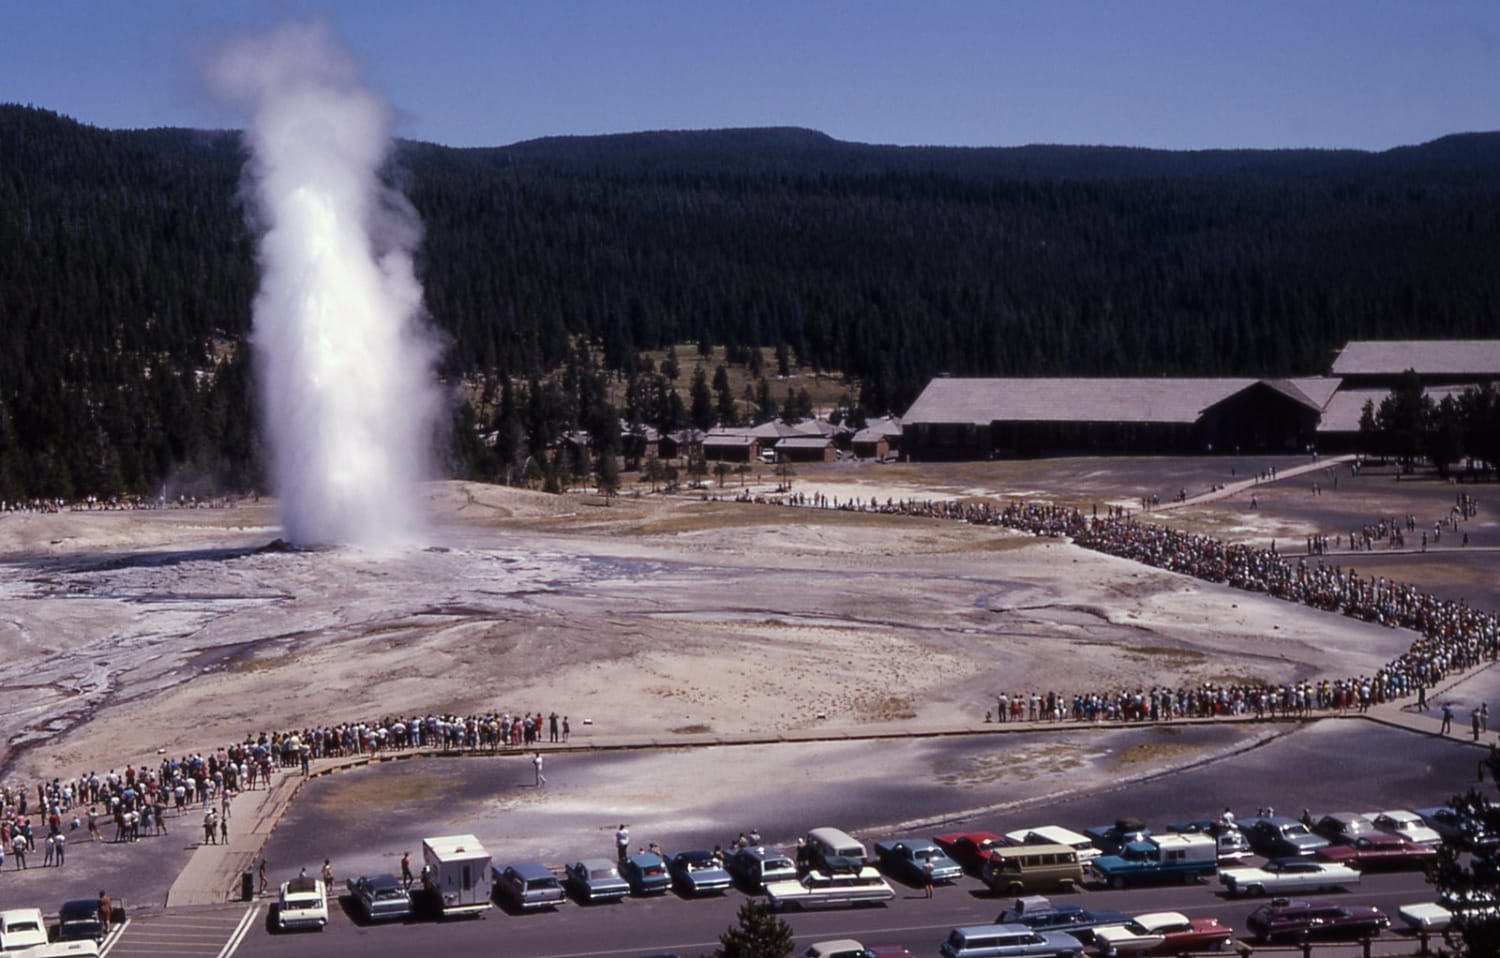 Climate Change Could Make Yellowstone's Famous Geyser Less Faithful